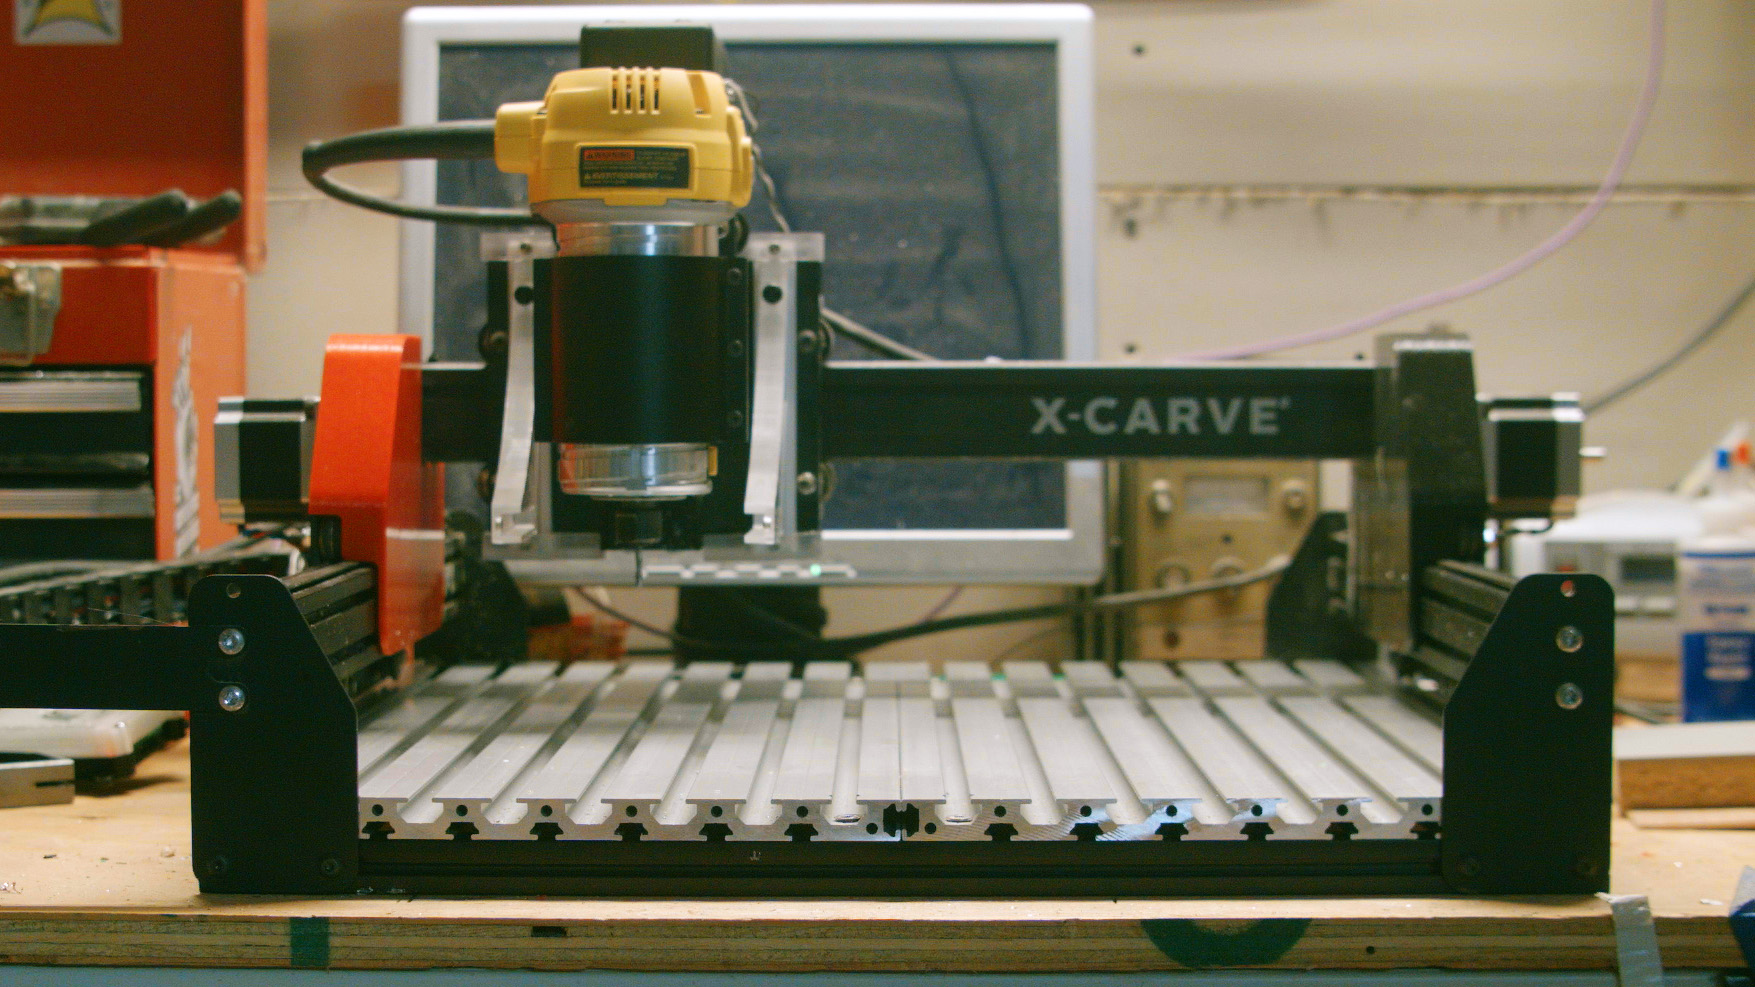 Add a T-Slot Bed to Your X-Carve for Easy, Rigid Workholding